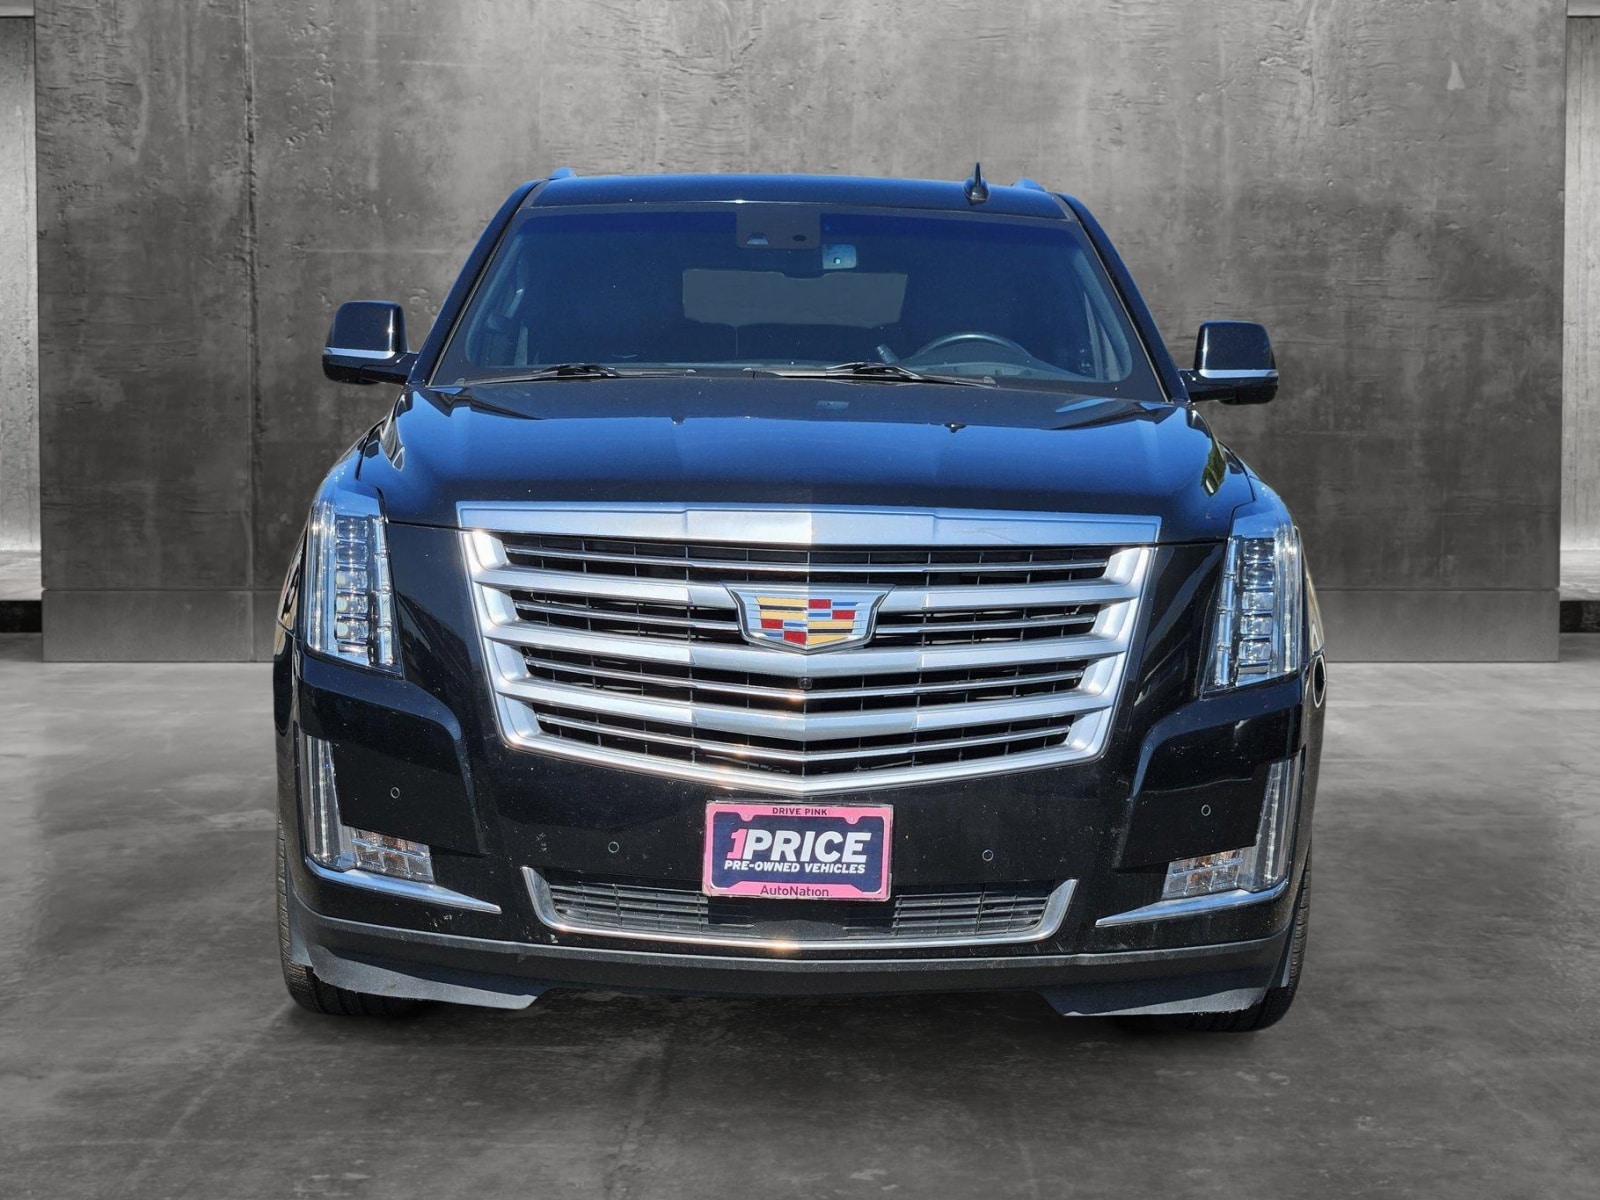 Used 2016 Cadillac Escalade Platinum with VIN 1GYS4DKJ6GR402440 for sale in Bellevue, WA